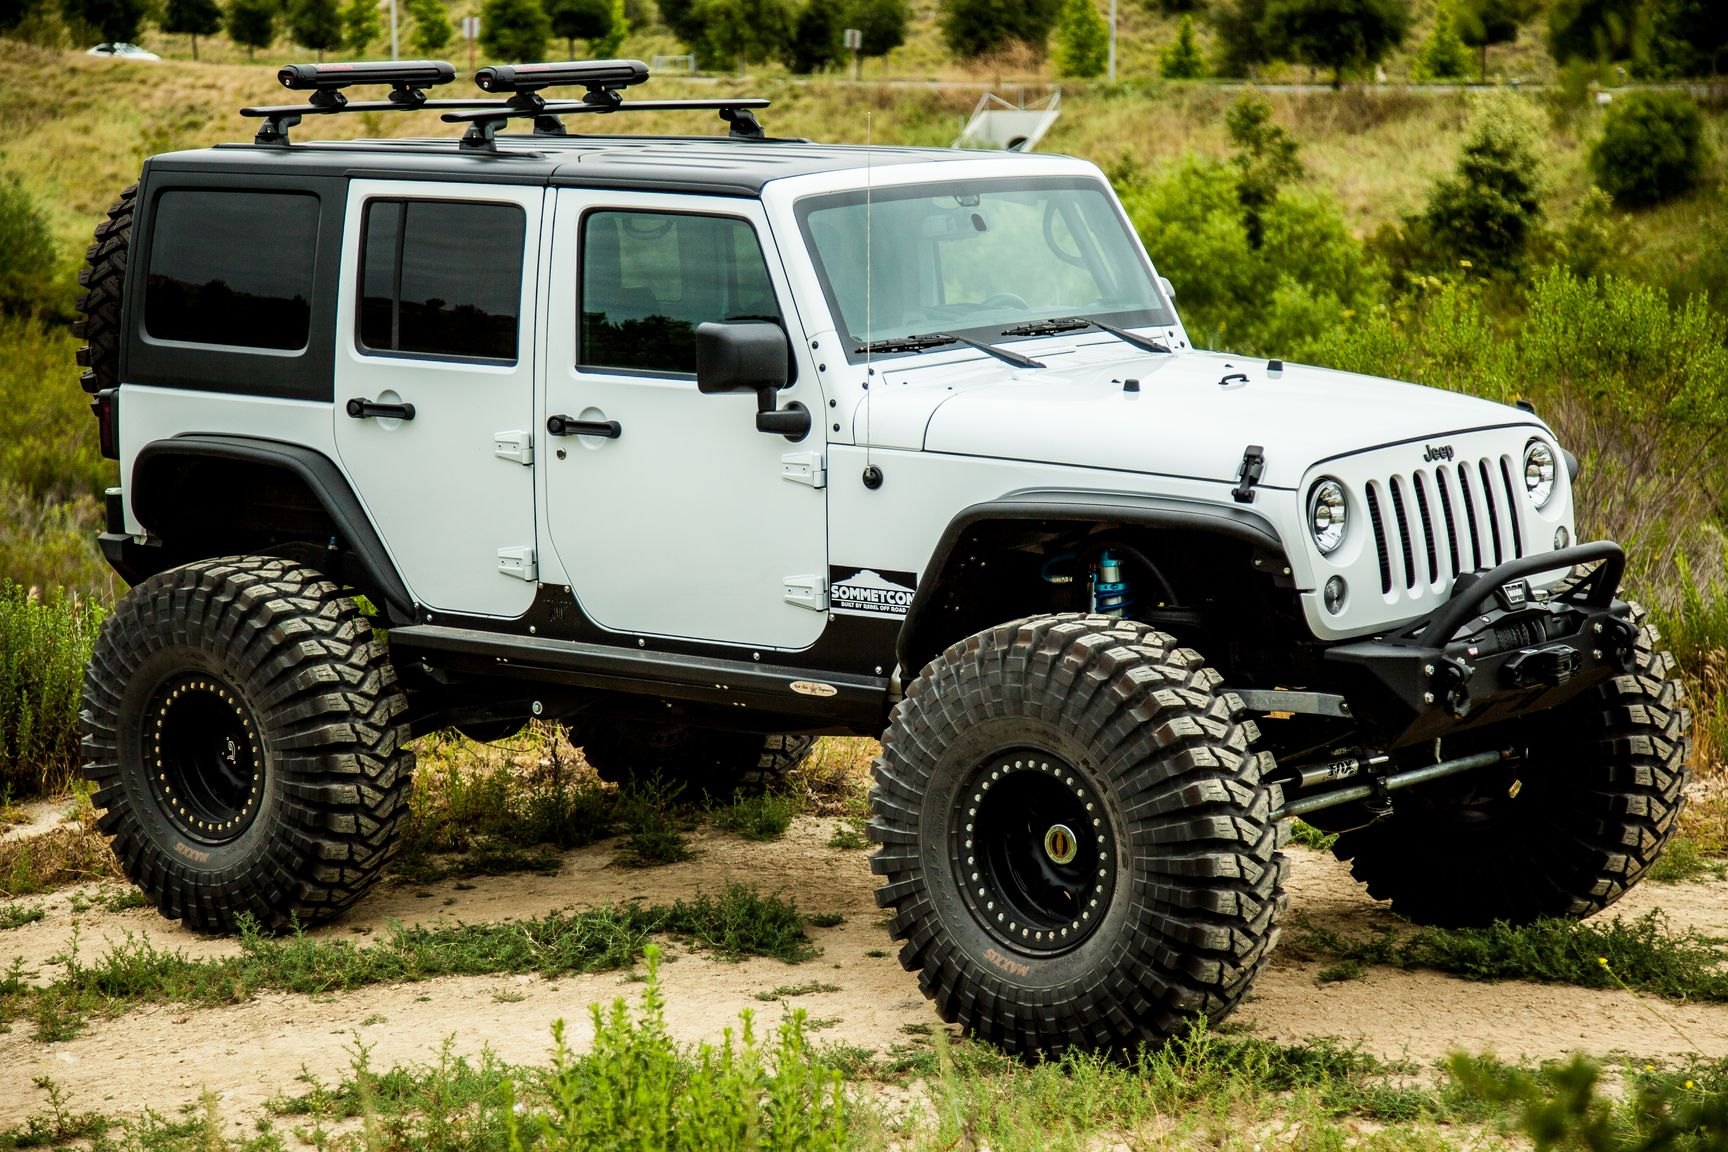 Jeeps Don't Get Better Prepared for Off-Roading Than this White Lifted Jeep  Wrangler on Maxxis Tires —  Gallery